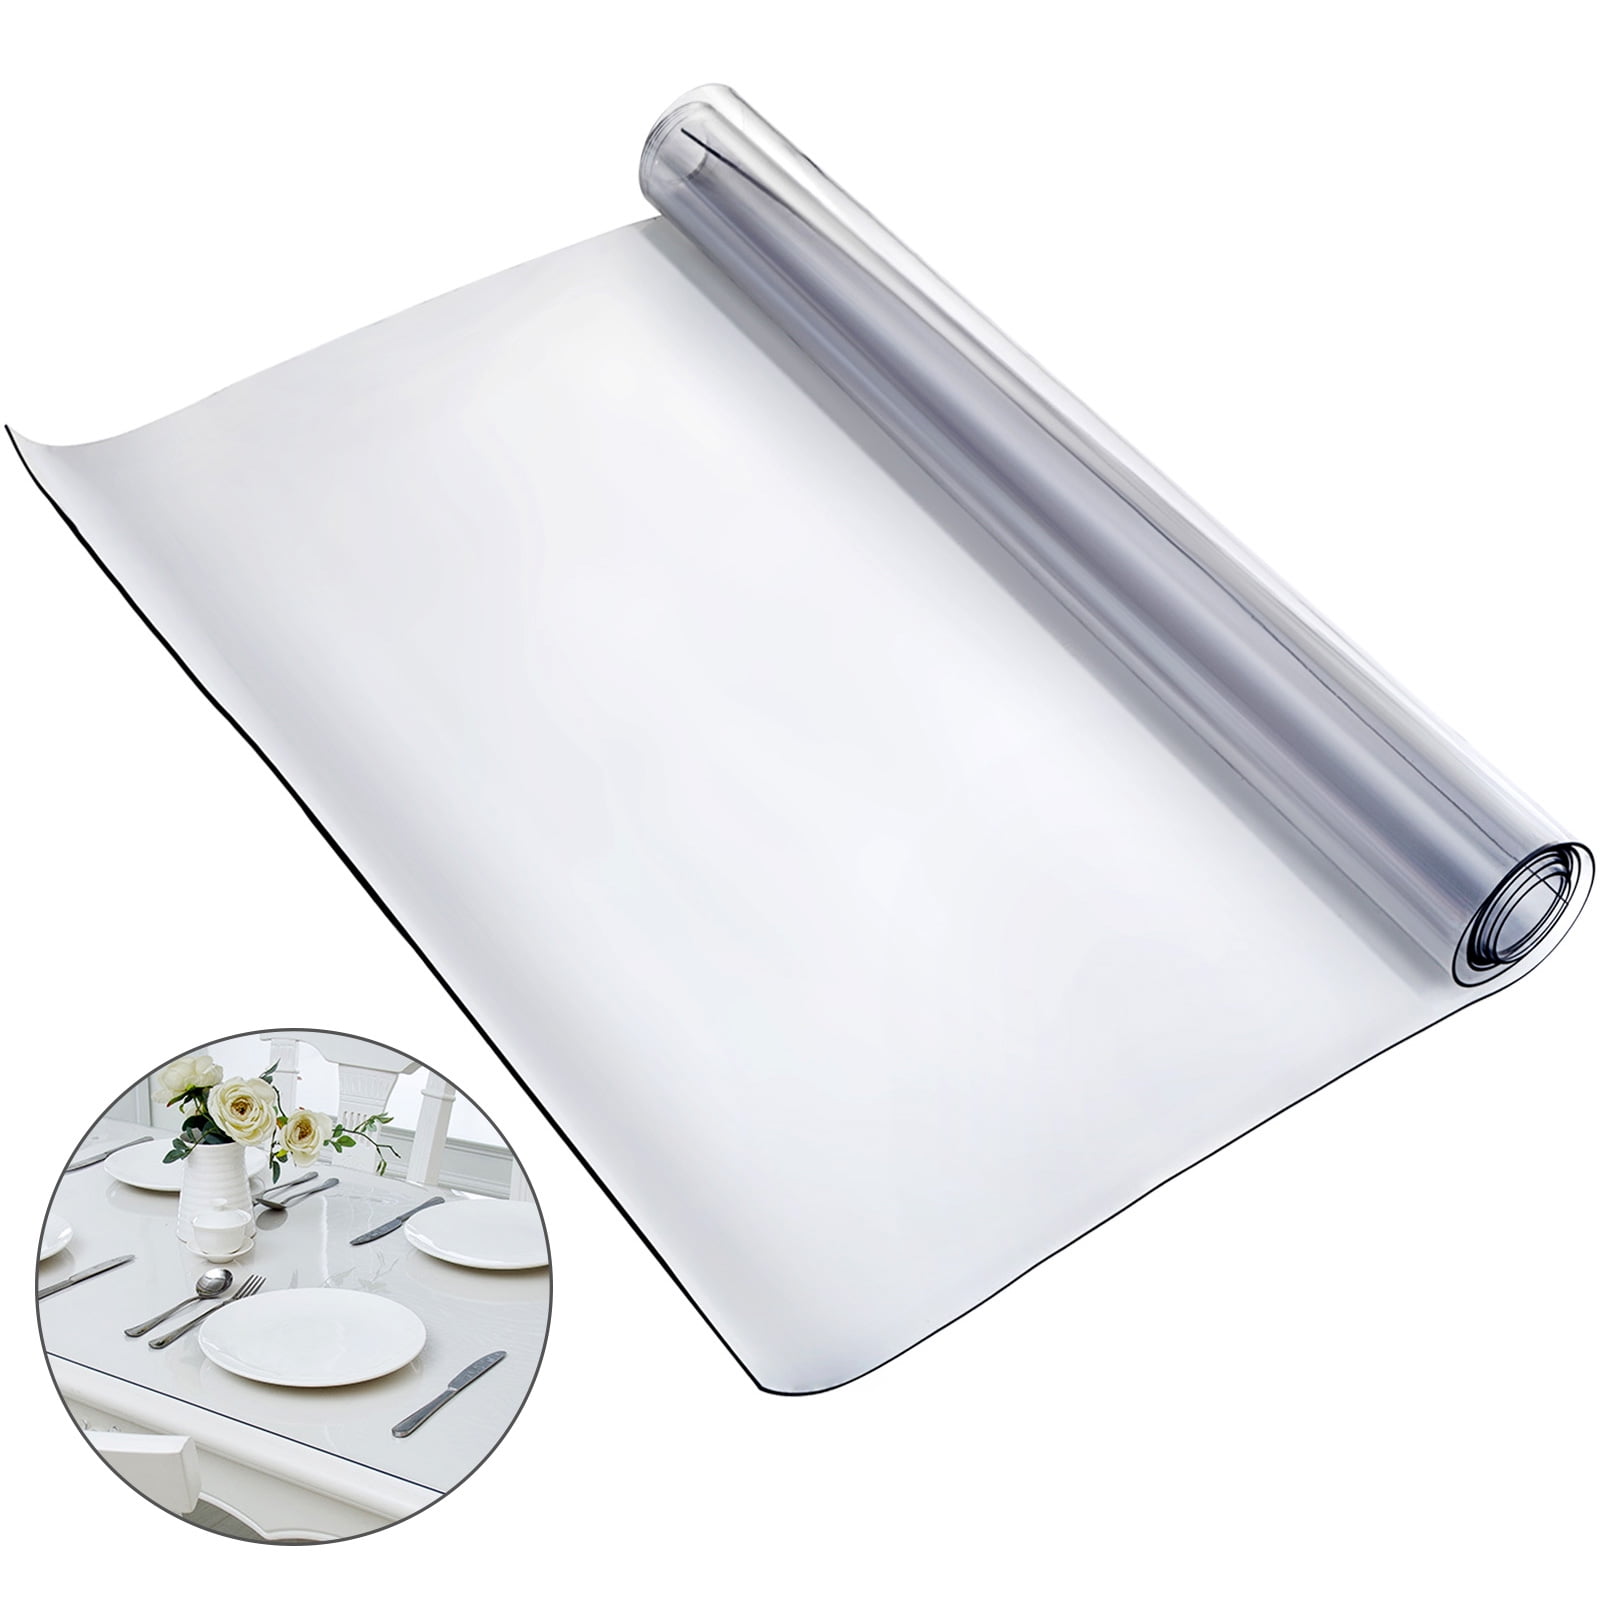 50 Inch Round New Clear Dining Room Tablecloth Dia PVC Plastic Table Cover  Protector Waterproof Heat Resistant Easy Clean Clear Vinyl Table Pad Mat